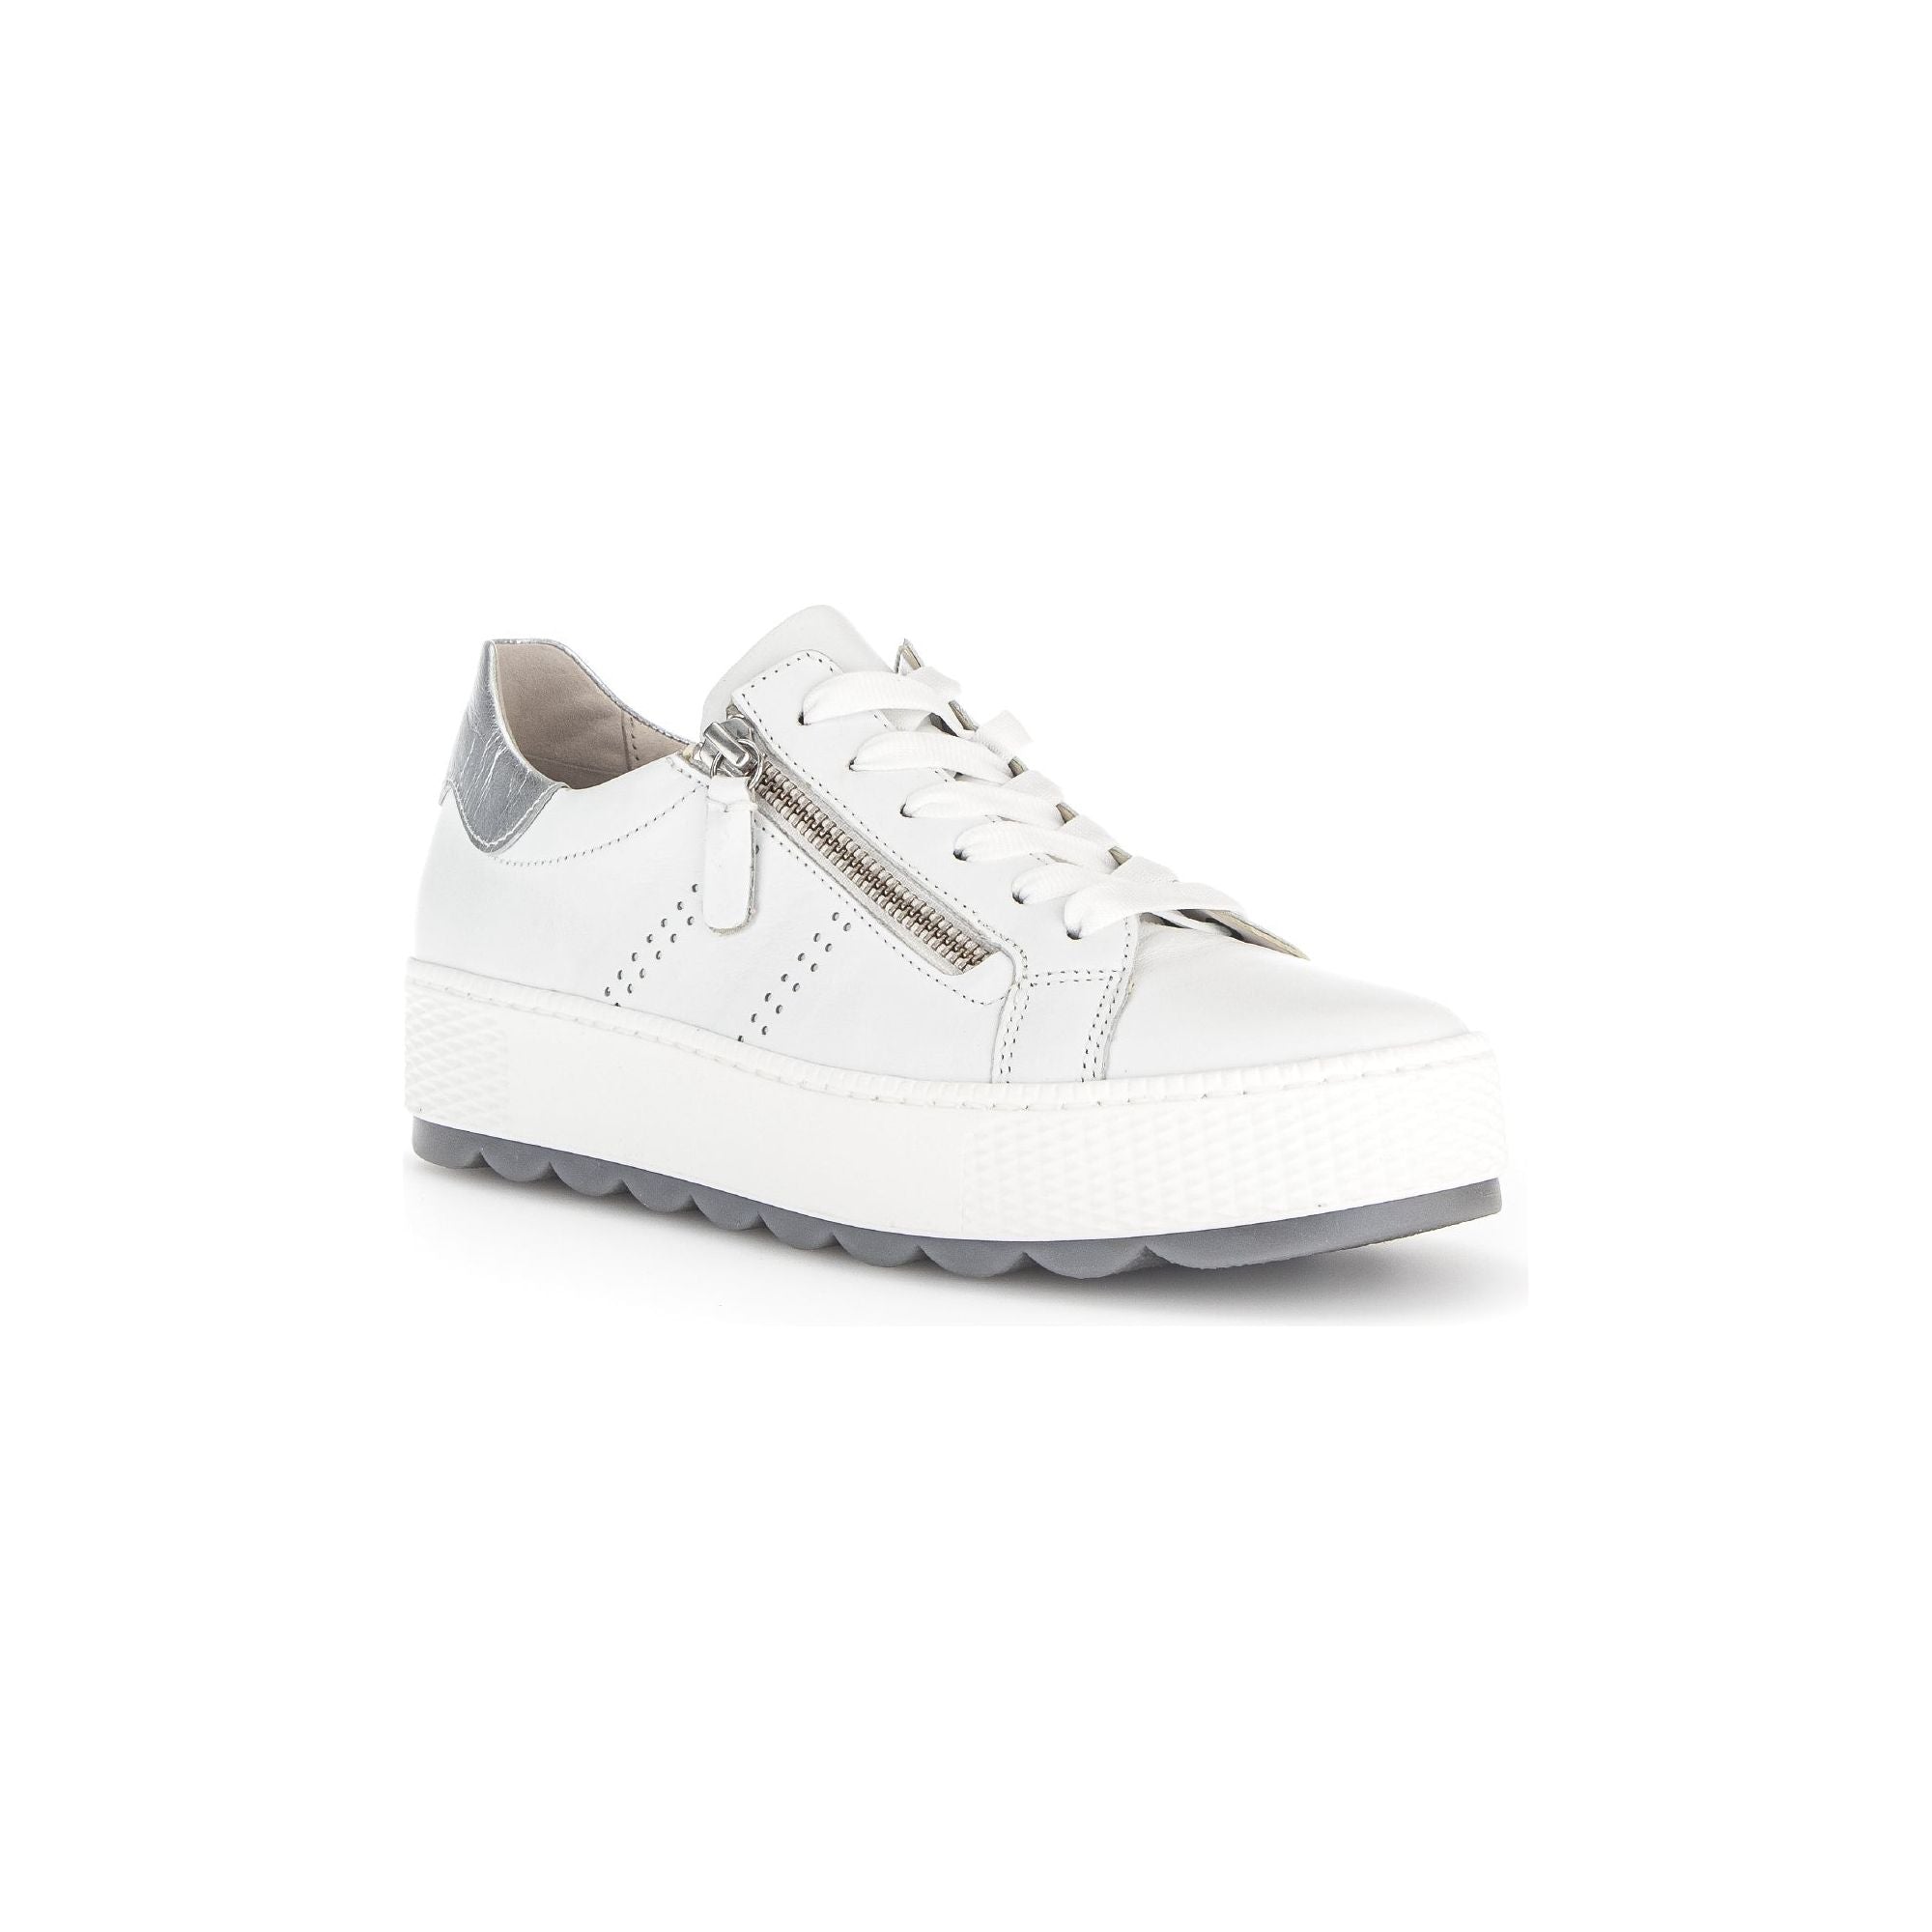 Gabor Quench (46.058.50)- Ladies Lace Trainer with Side Zip in White.&nbsp;Gabor Shoes | Ladies Shoes | Wisemans Bantry | Shoe Shop | West Cork | Munster | Ireland